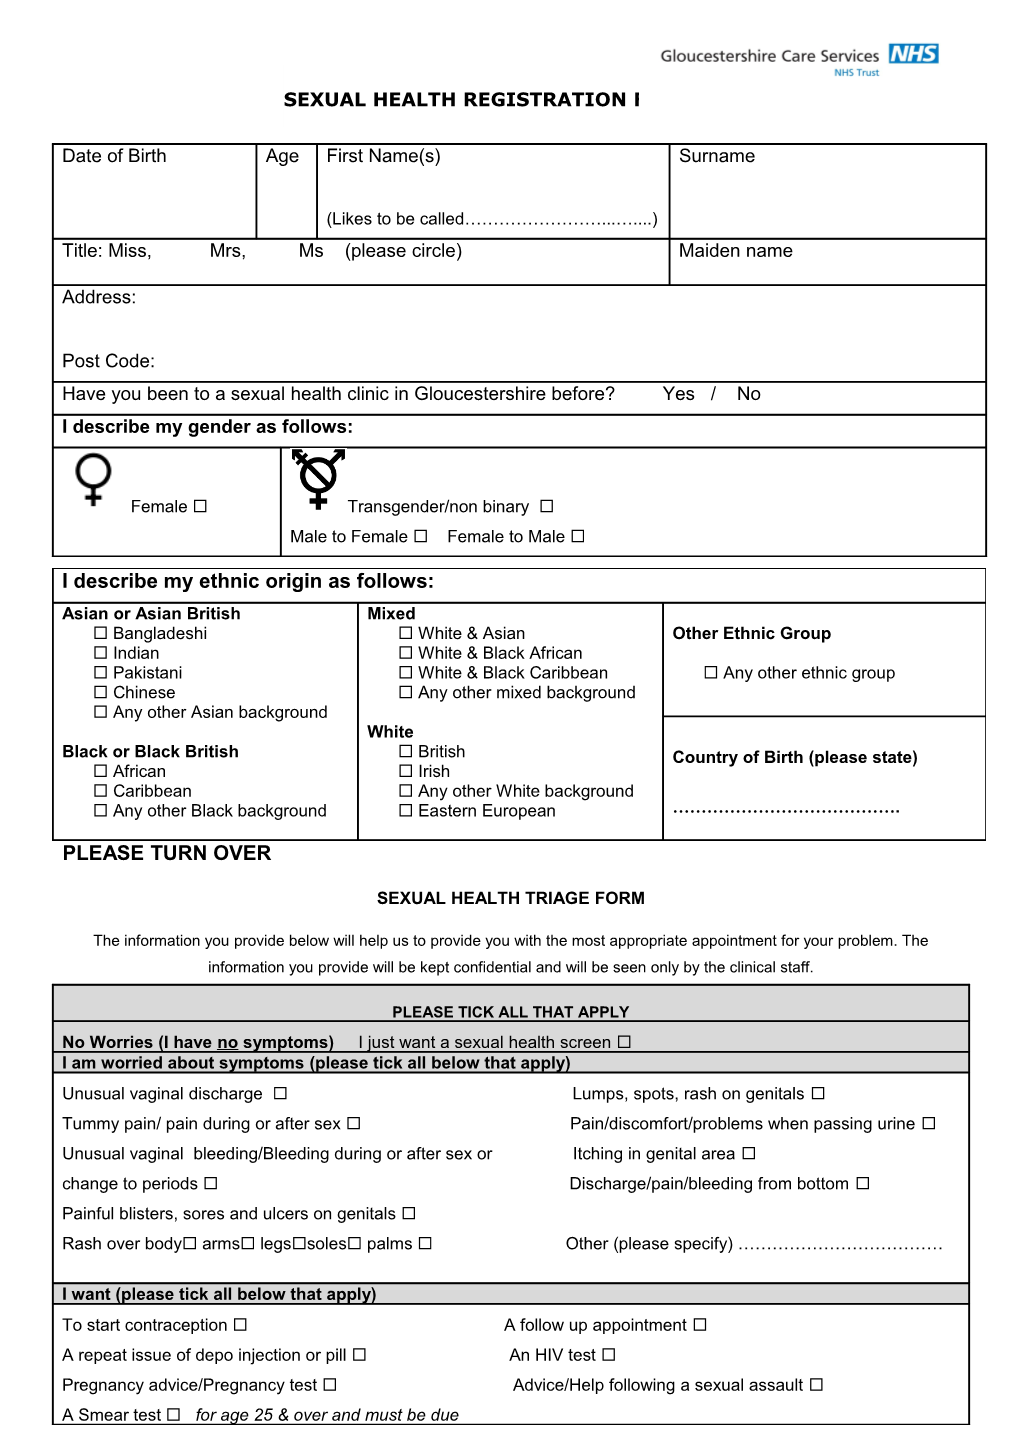 Gloucestershire Pct Sexual Health Female Registration Form